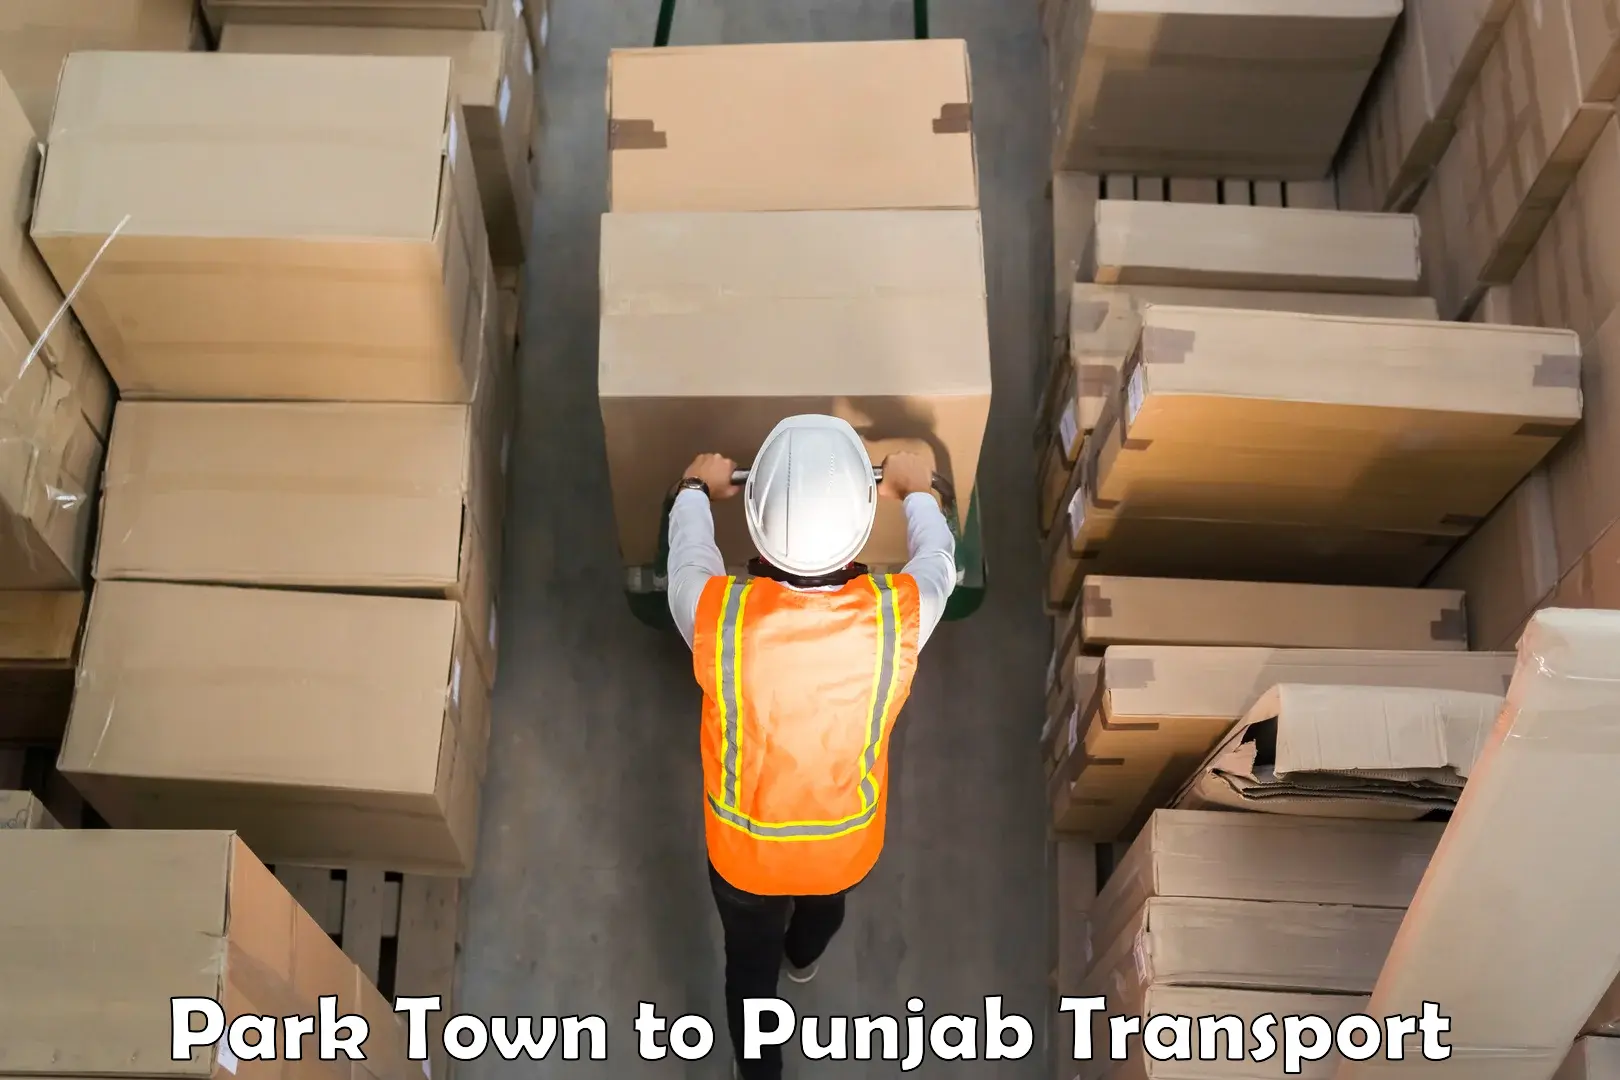 Air cargo transport services Park Town to Amritsar